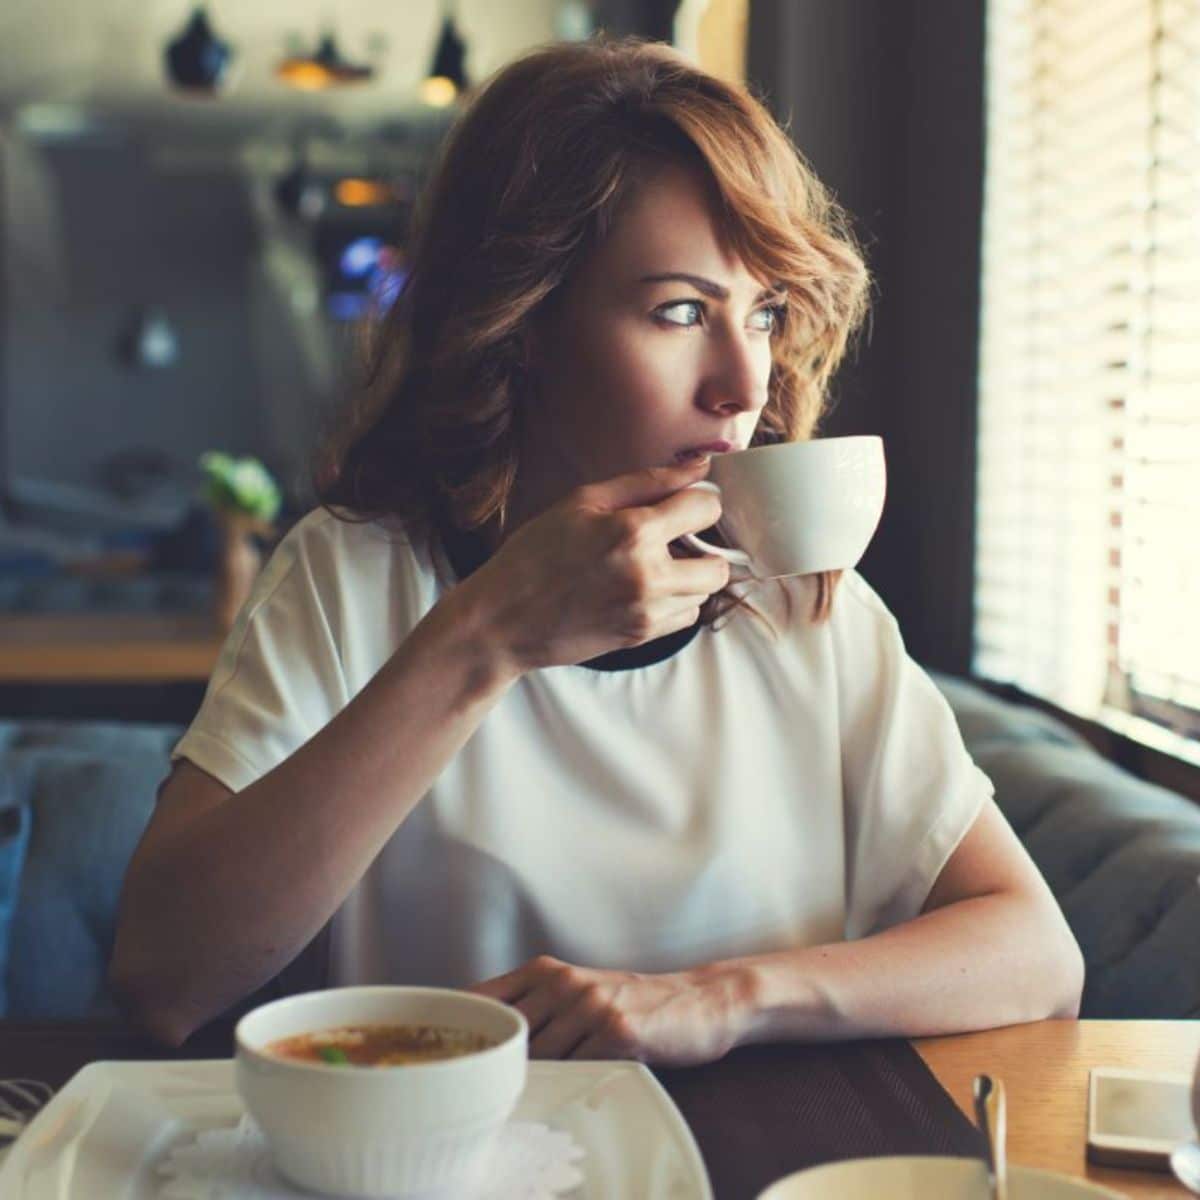 Young woman sipping a coffe.